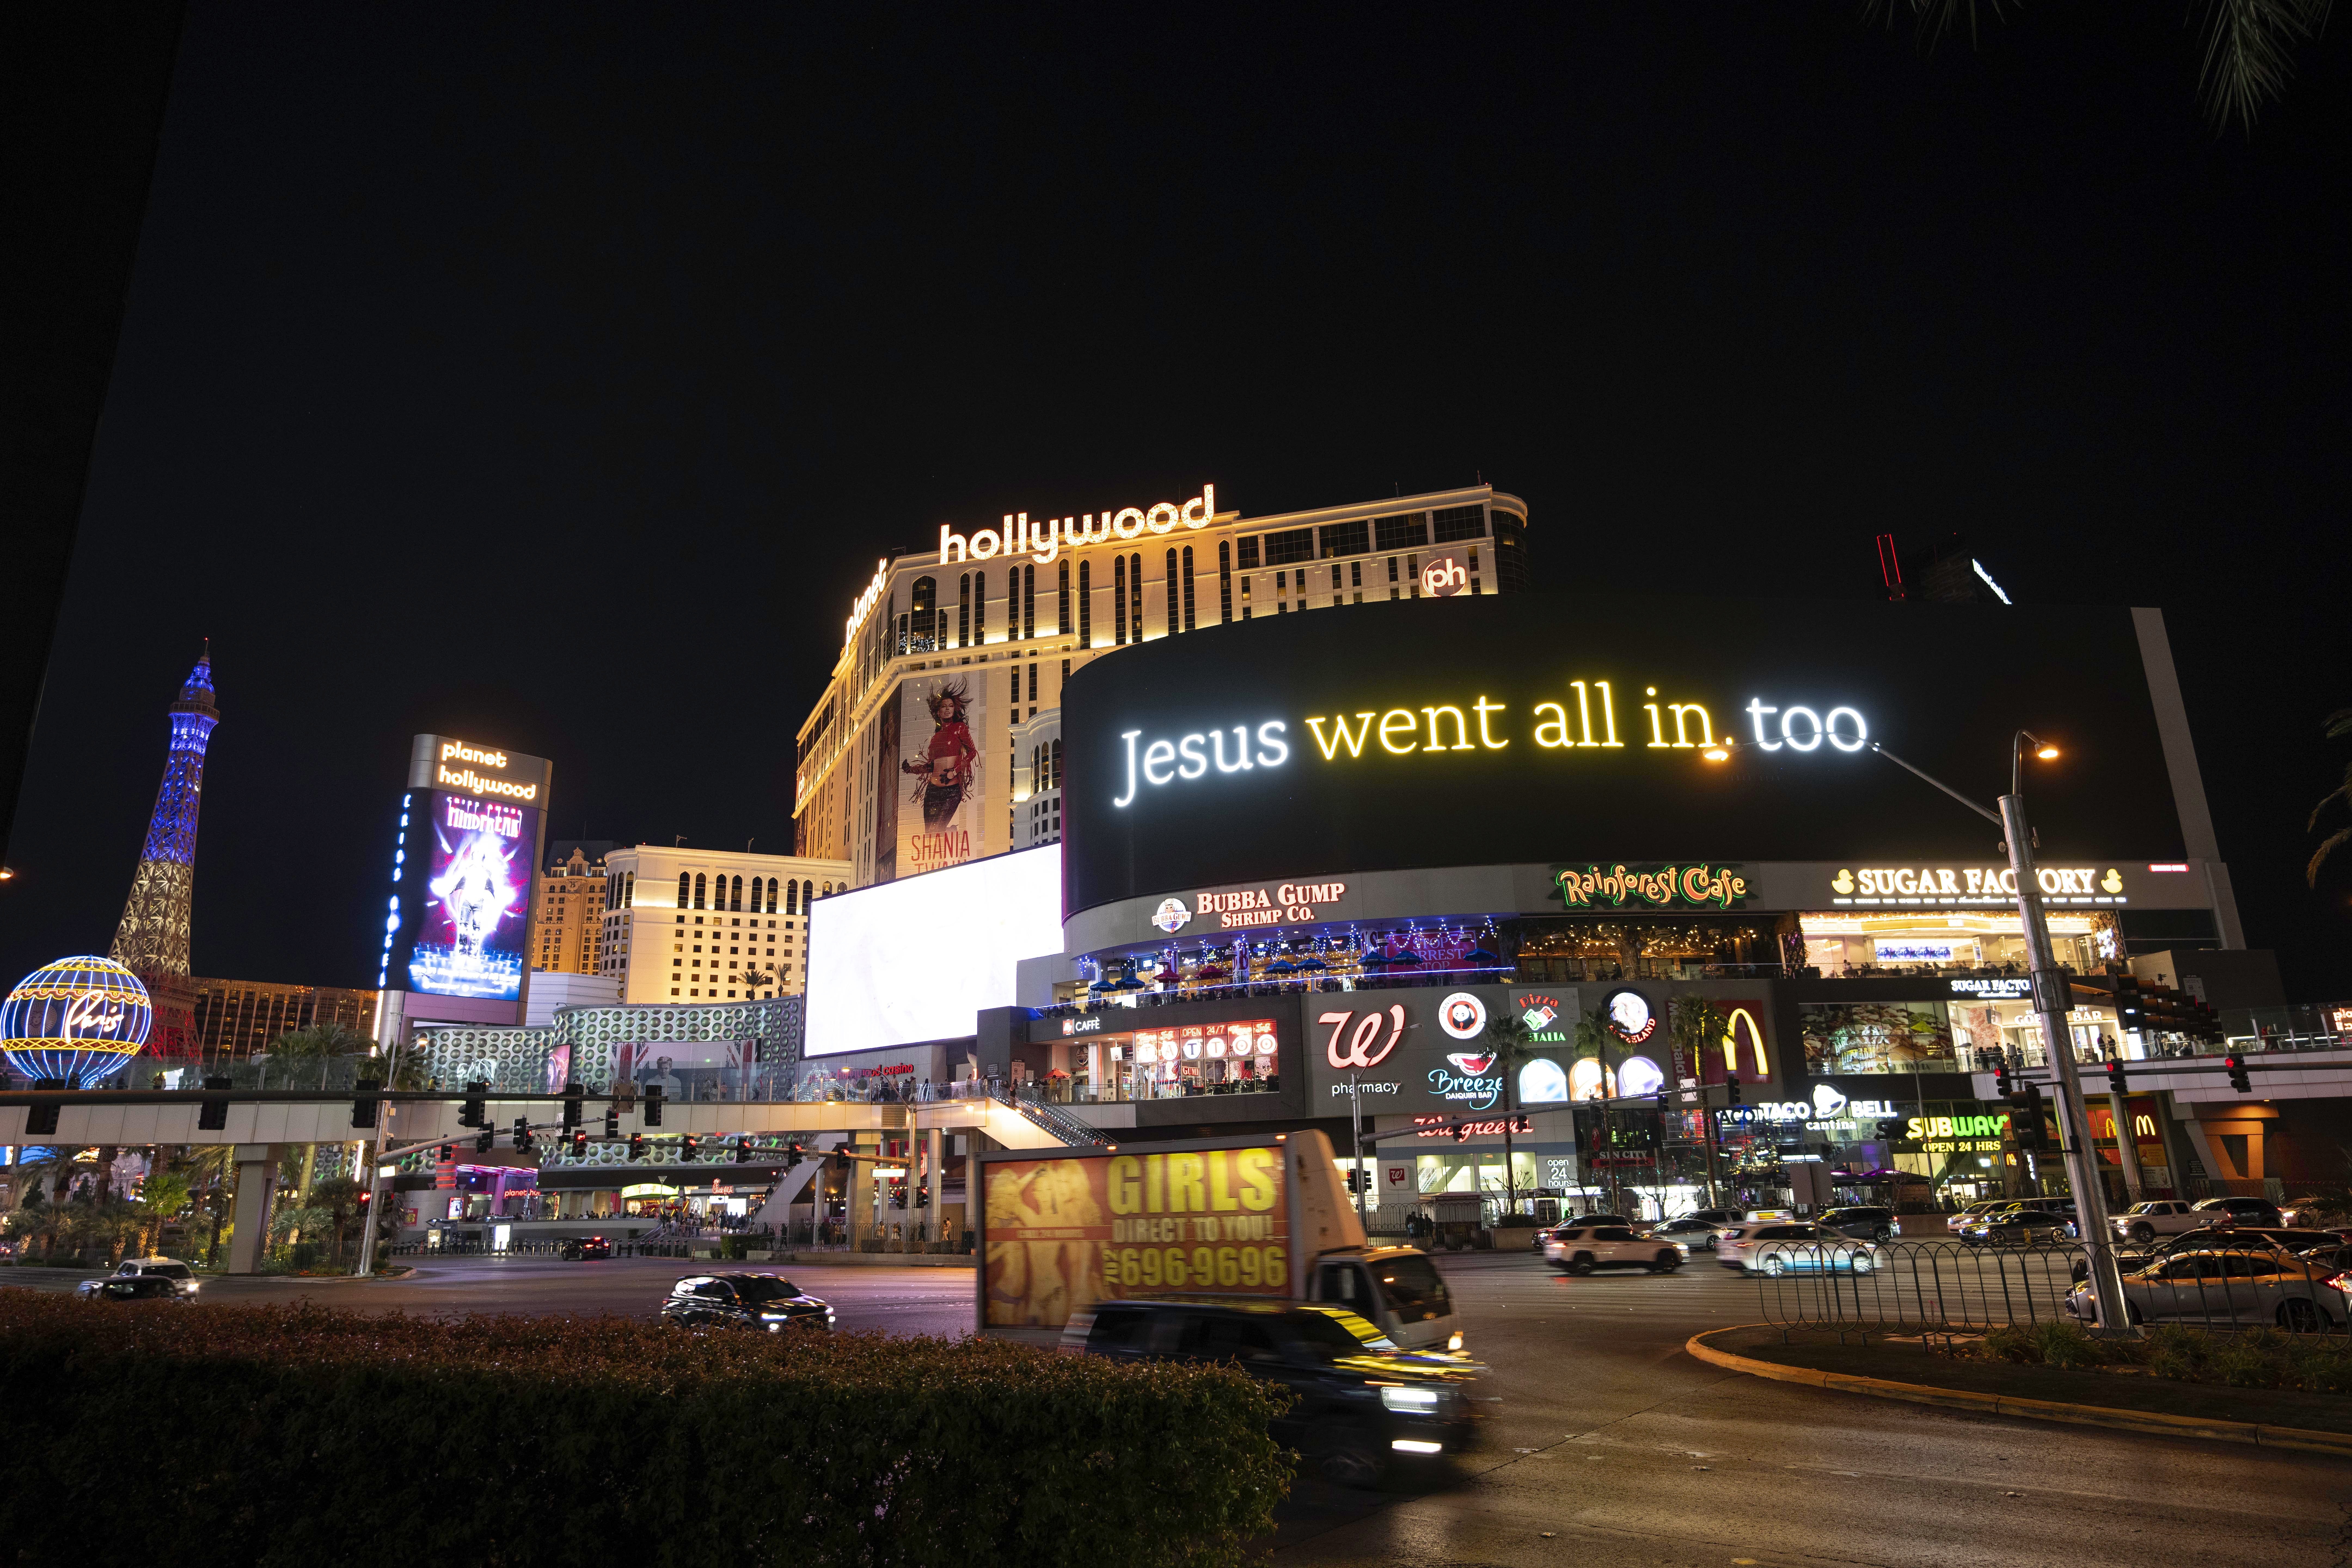 A lit billboard for the He Gets Us campaign seen in Las Vegas on the strip at night. It reads "Jesus went all in, too."